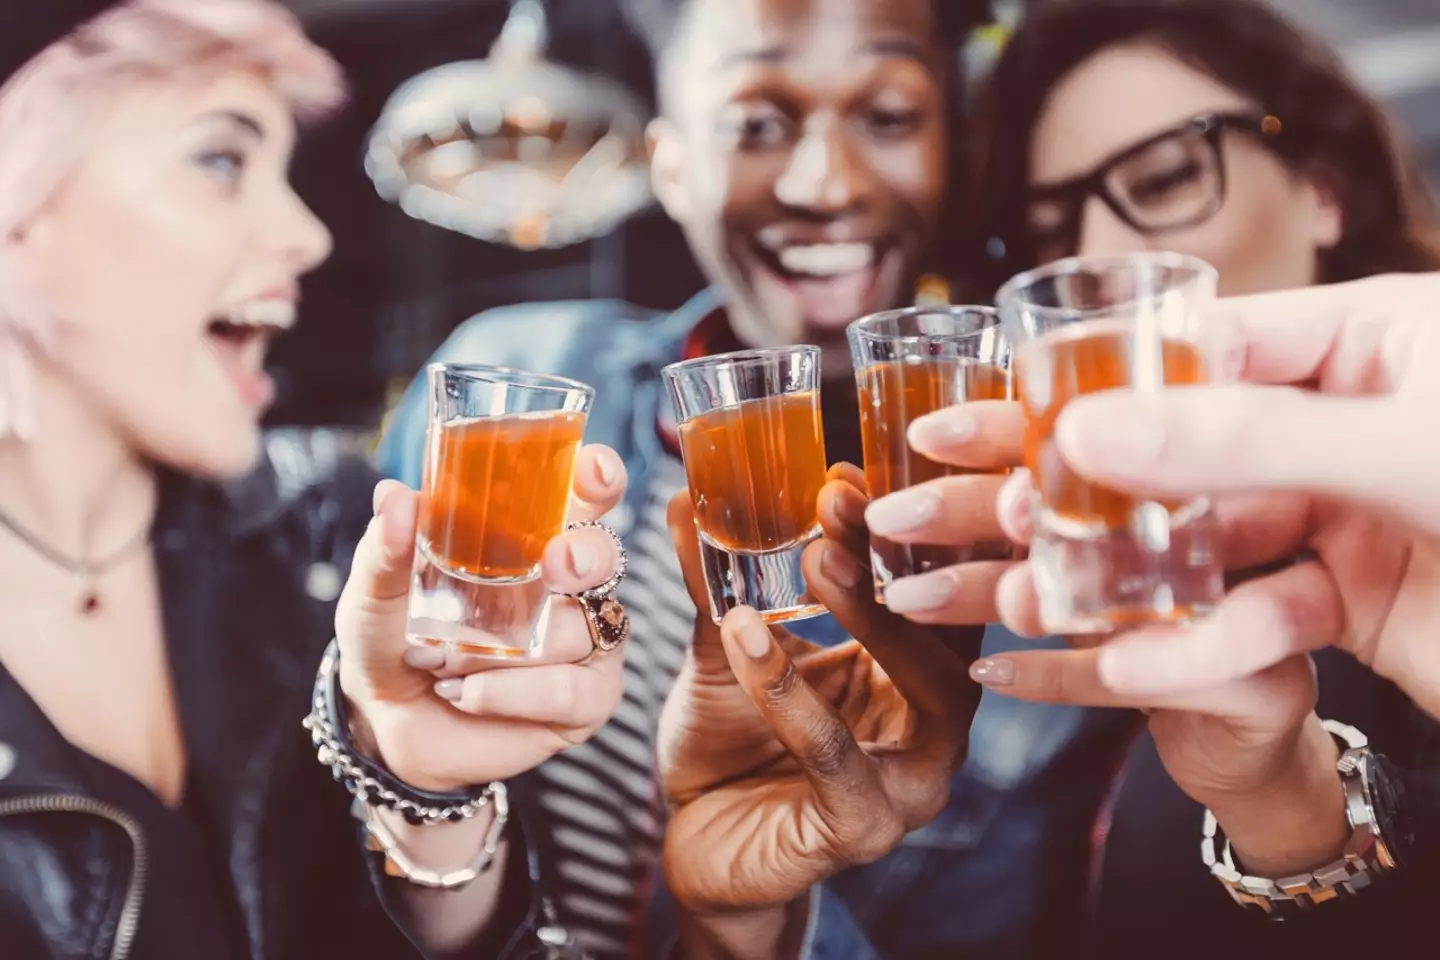 A recovery coach has issued a warning to those who admit to binge-drinking once a week. (Getty Stock Images)